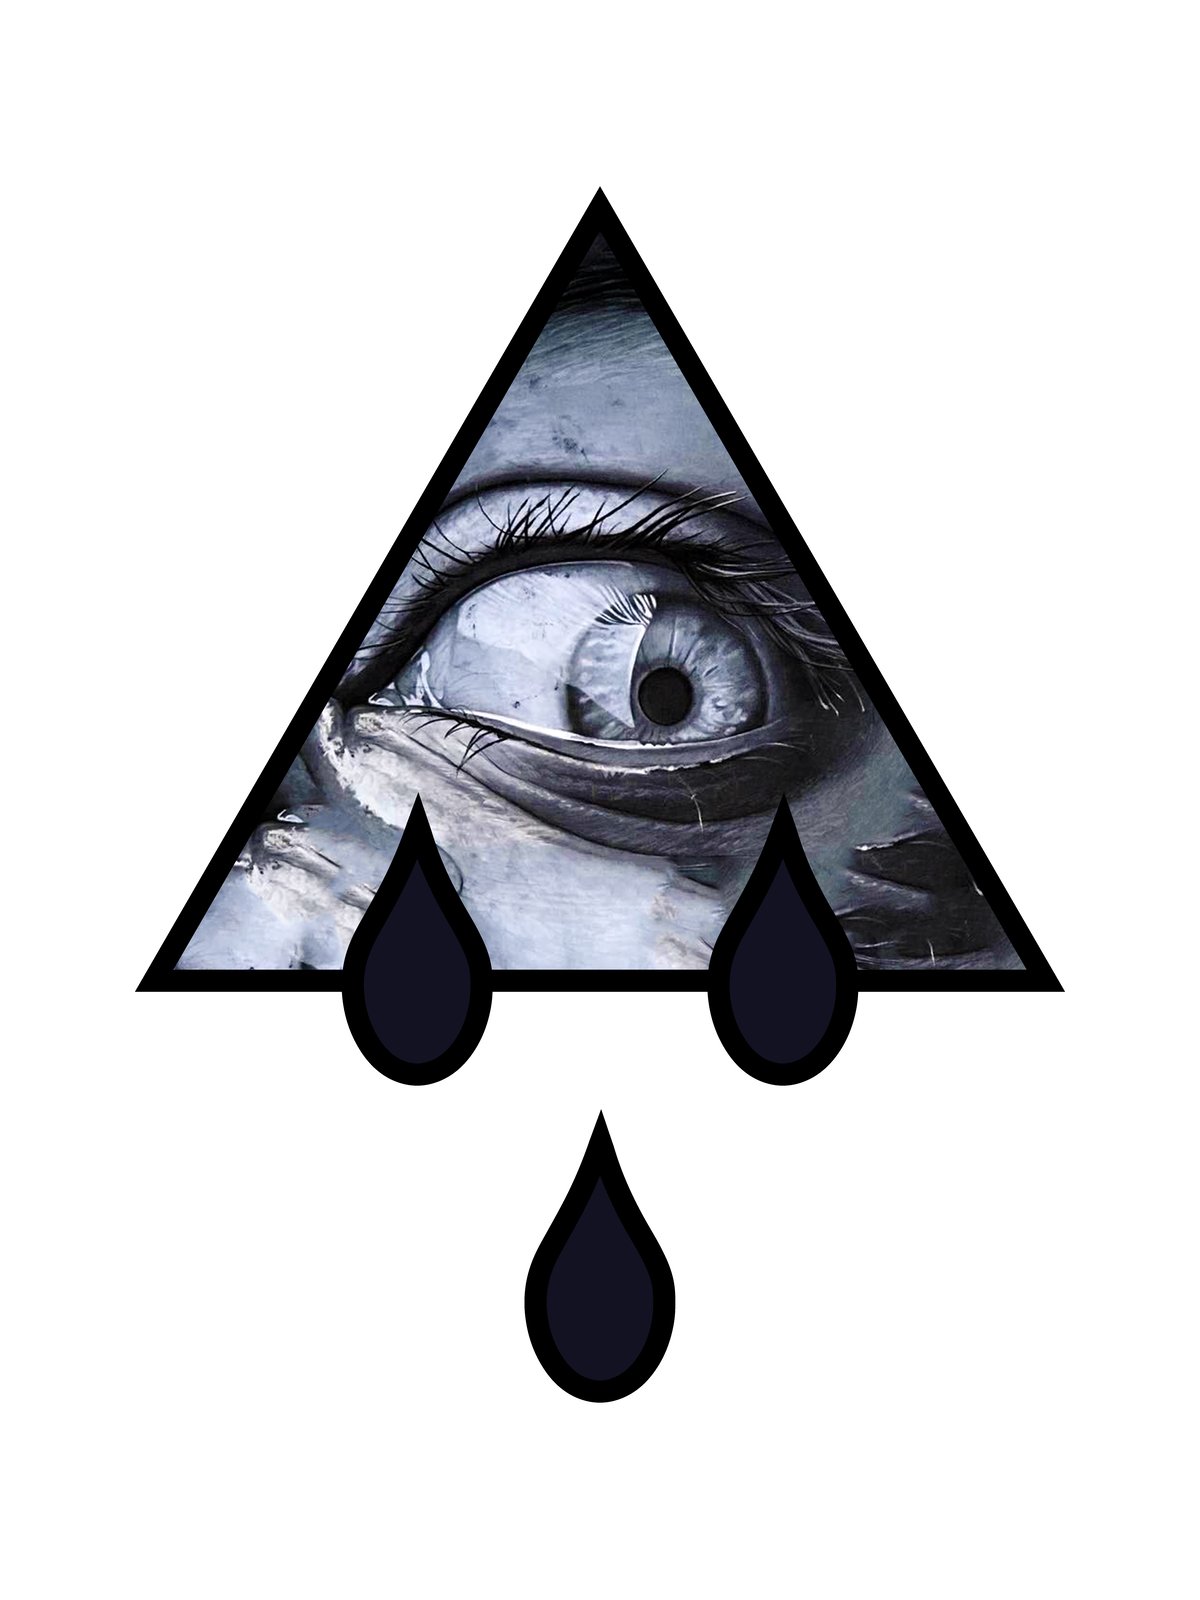 Image of cULT sHIRT - eYE cRY